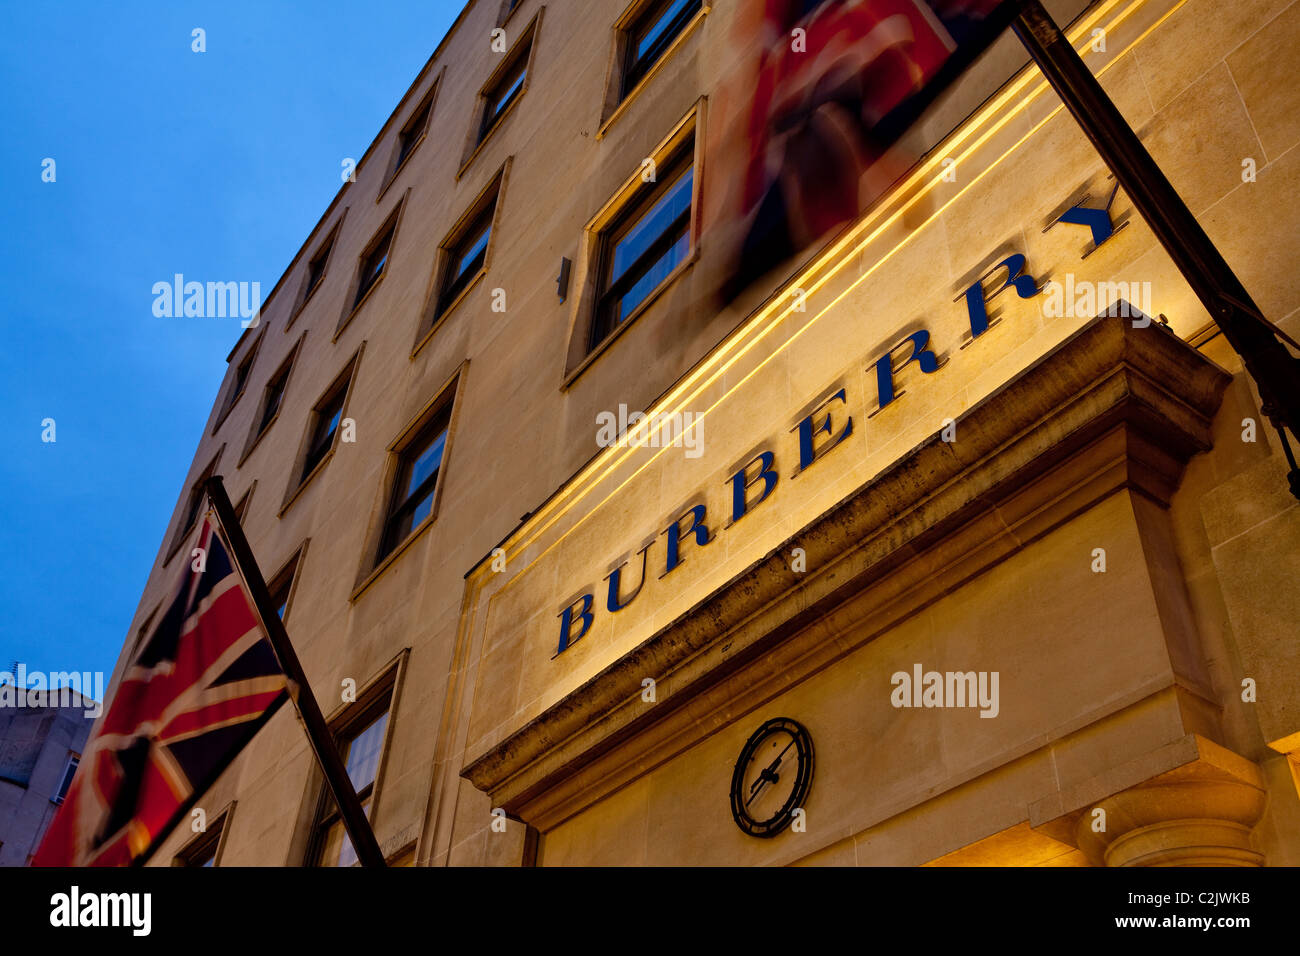 Burberry store, New Bond Street, London in the evening Stock Photo